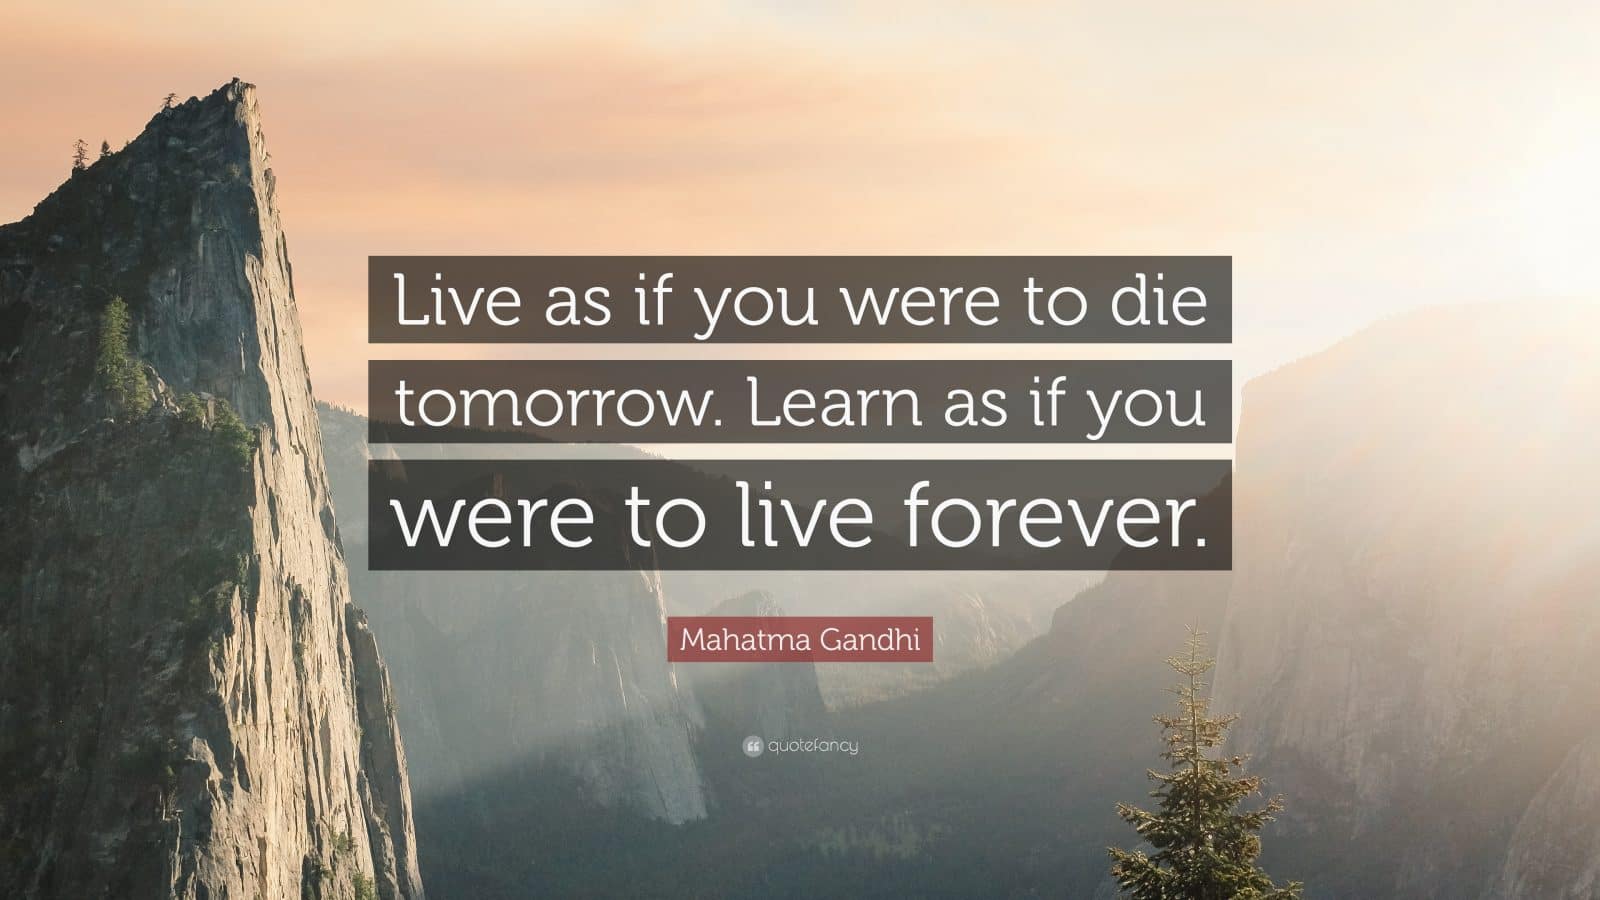 Ghandi-learn-forever-quote